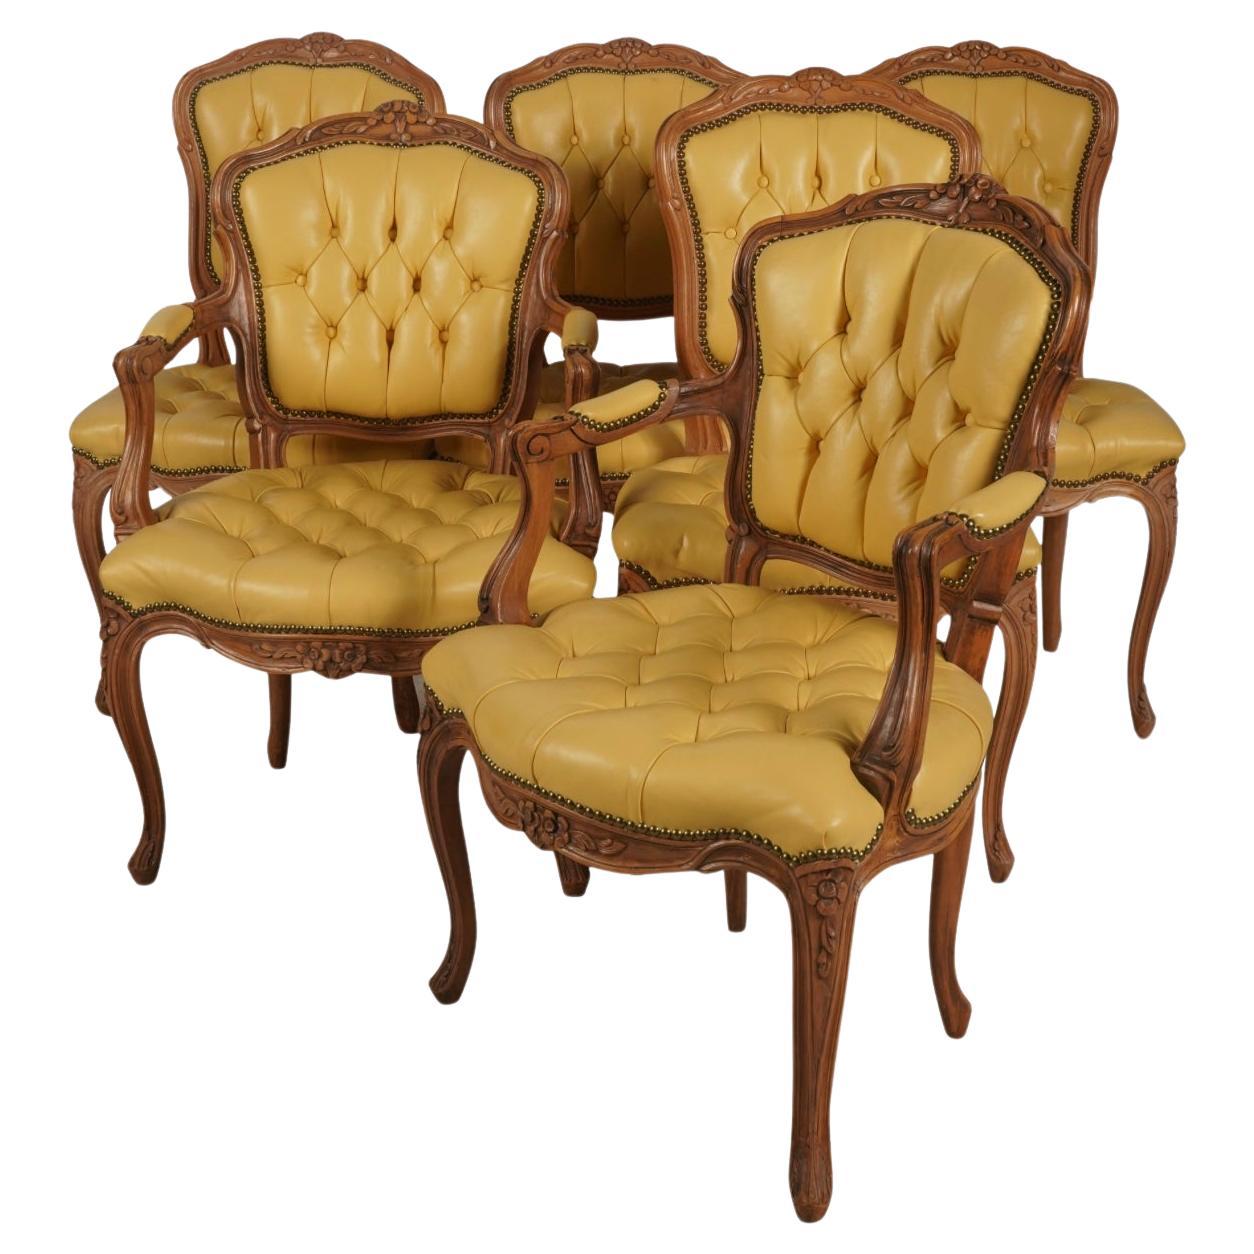 Set of 6 French Provincial Style Tufted Yellow Leather Arm Chair Fauteuils